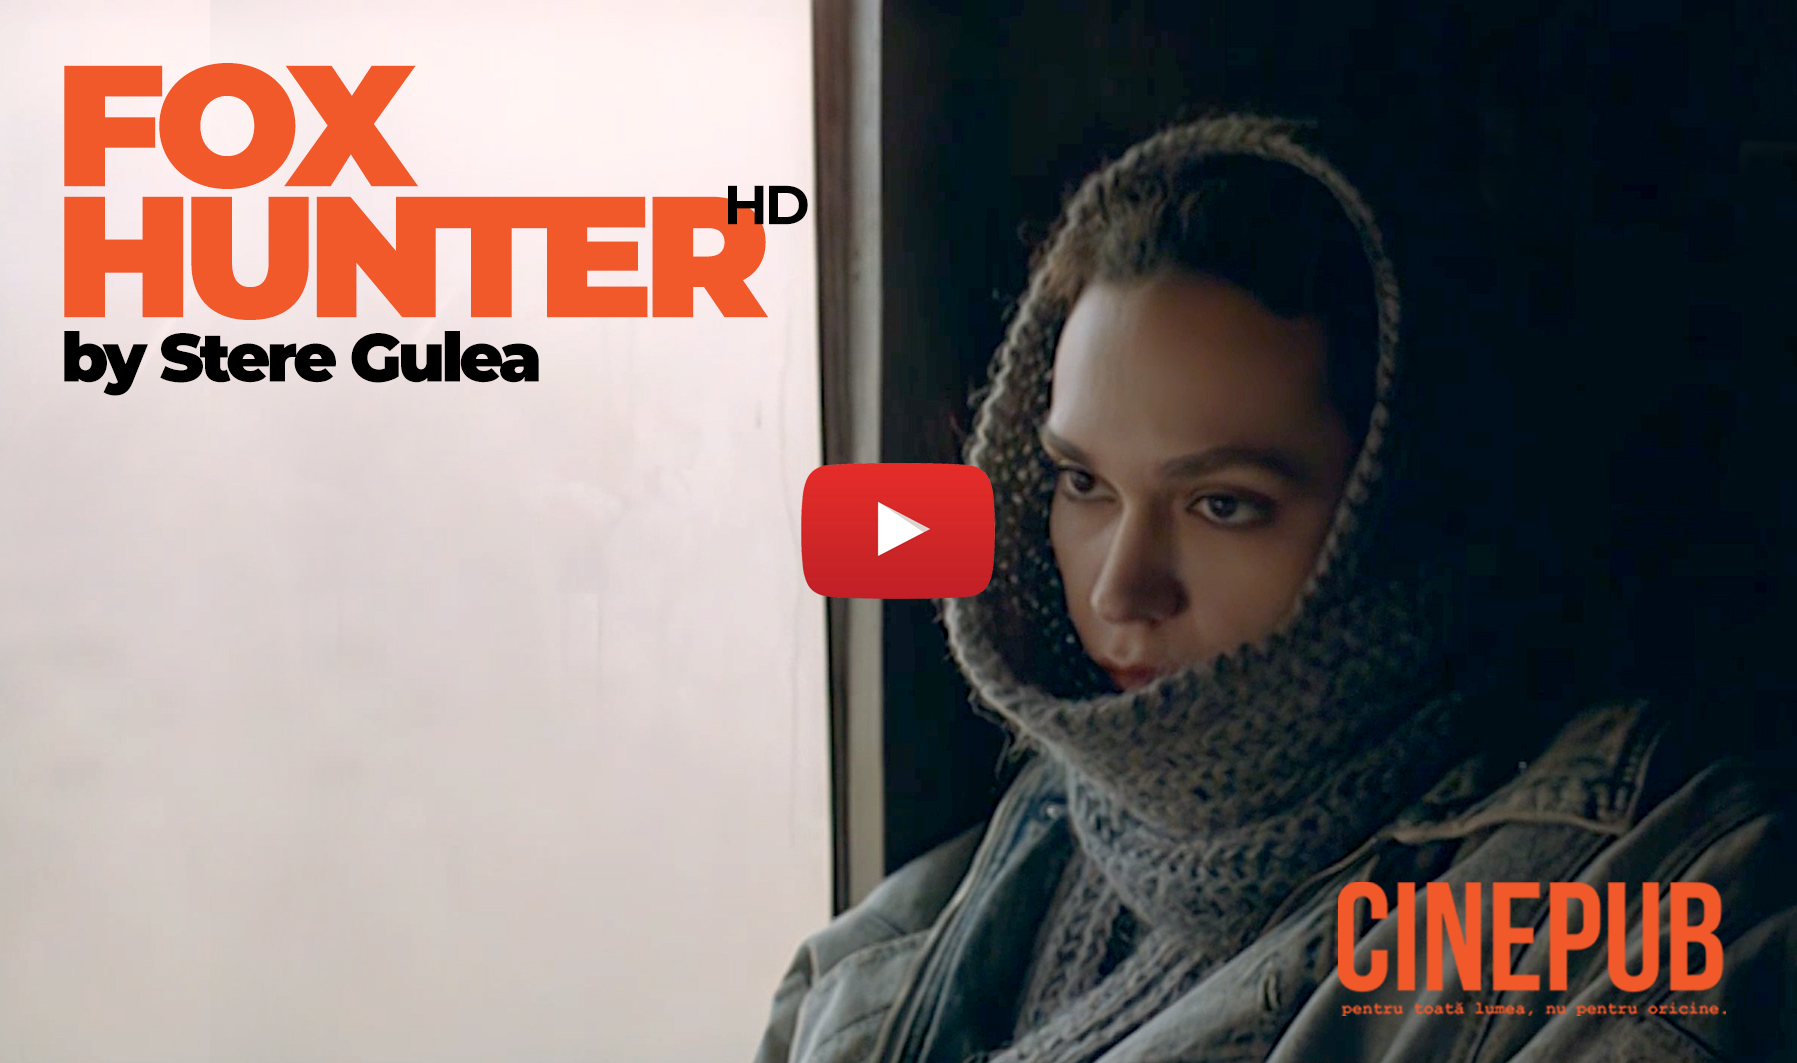 Fox Hunter by Stere Gulea - subtitled in english online on CINEPUB